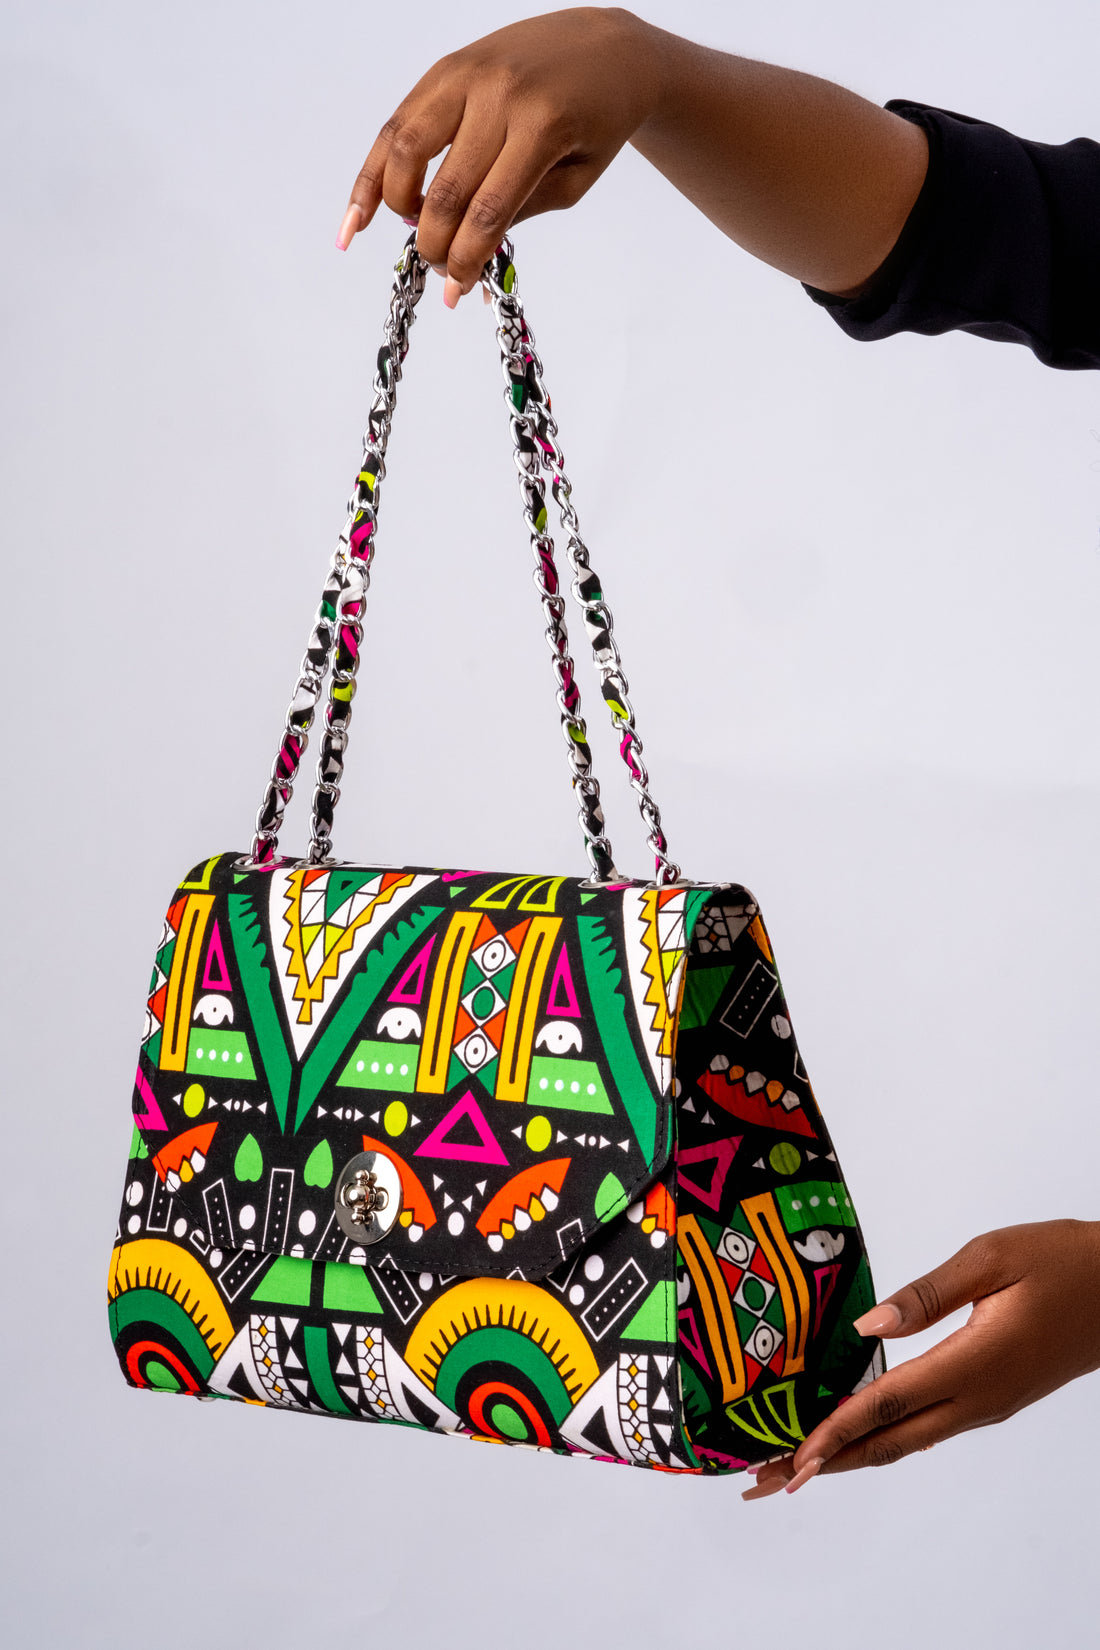 The Best Ankara/African Print Trends For This Season.